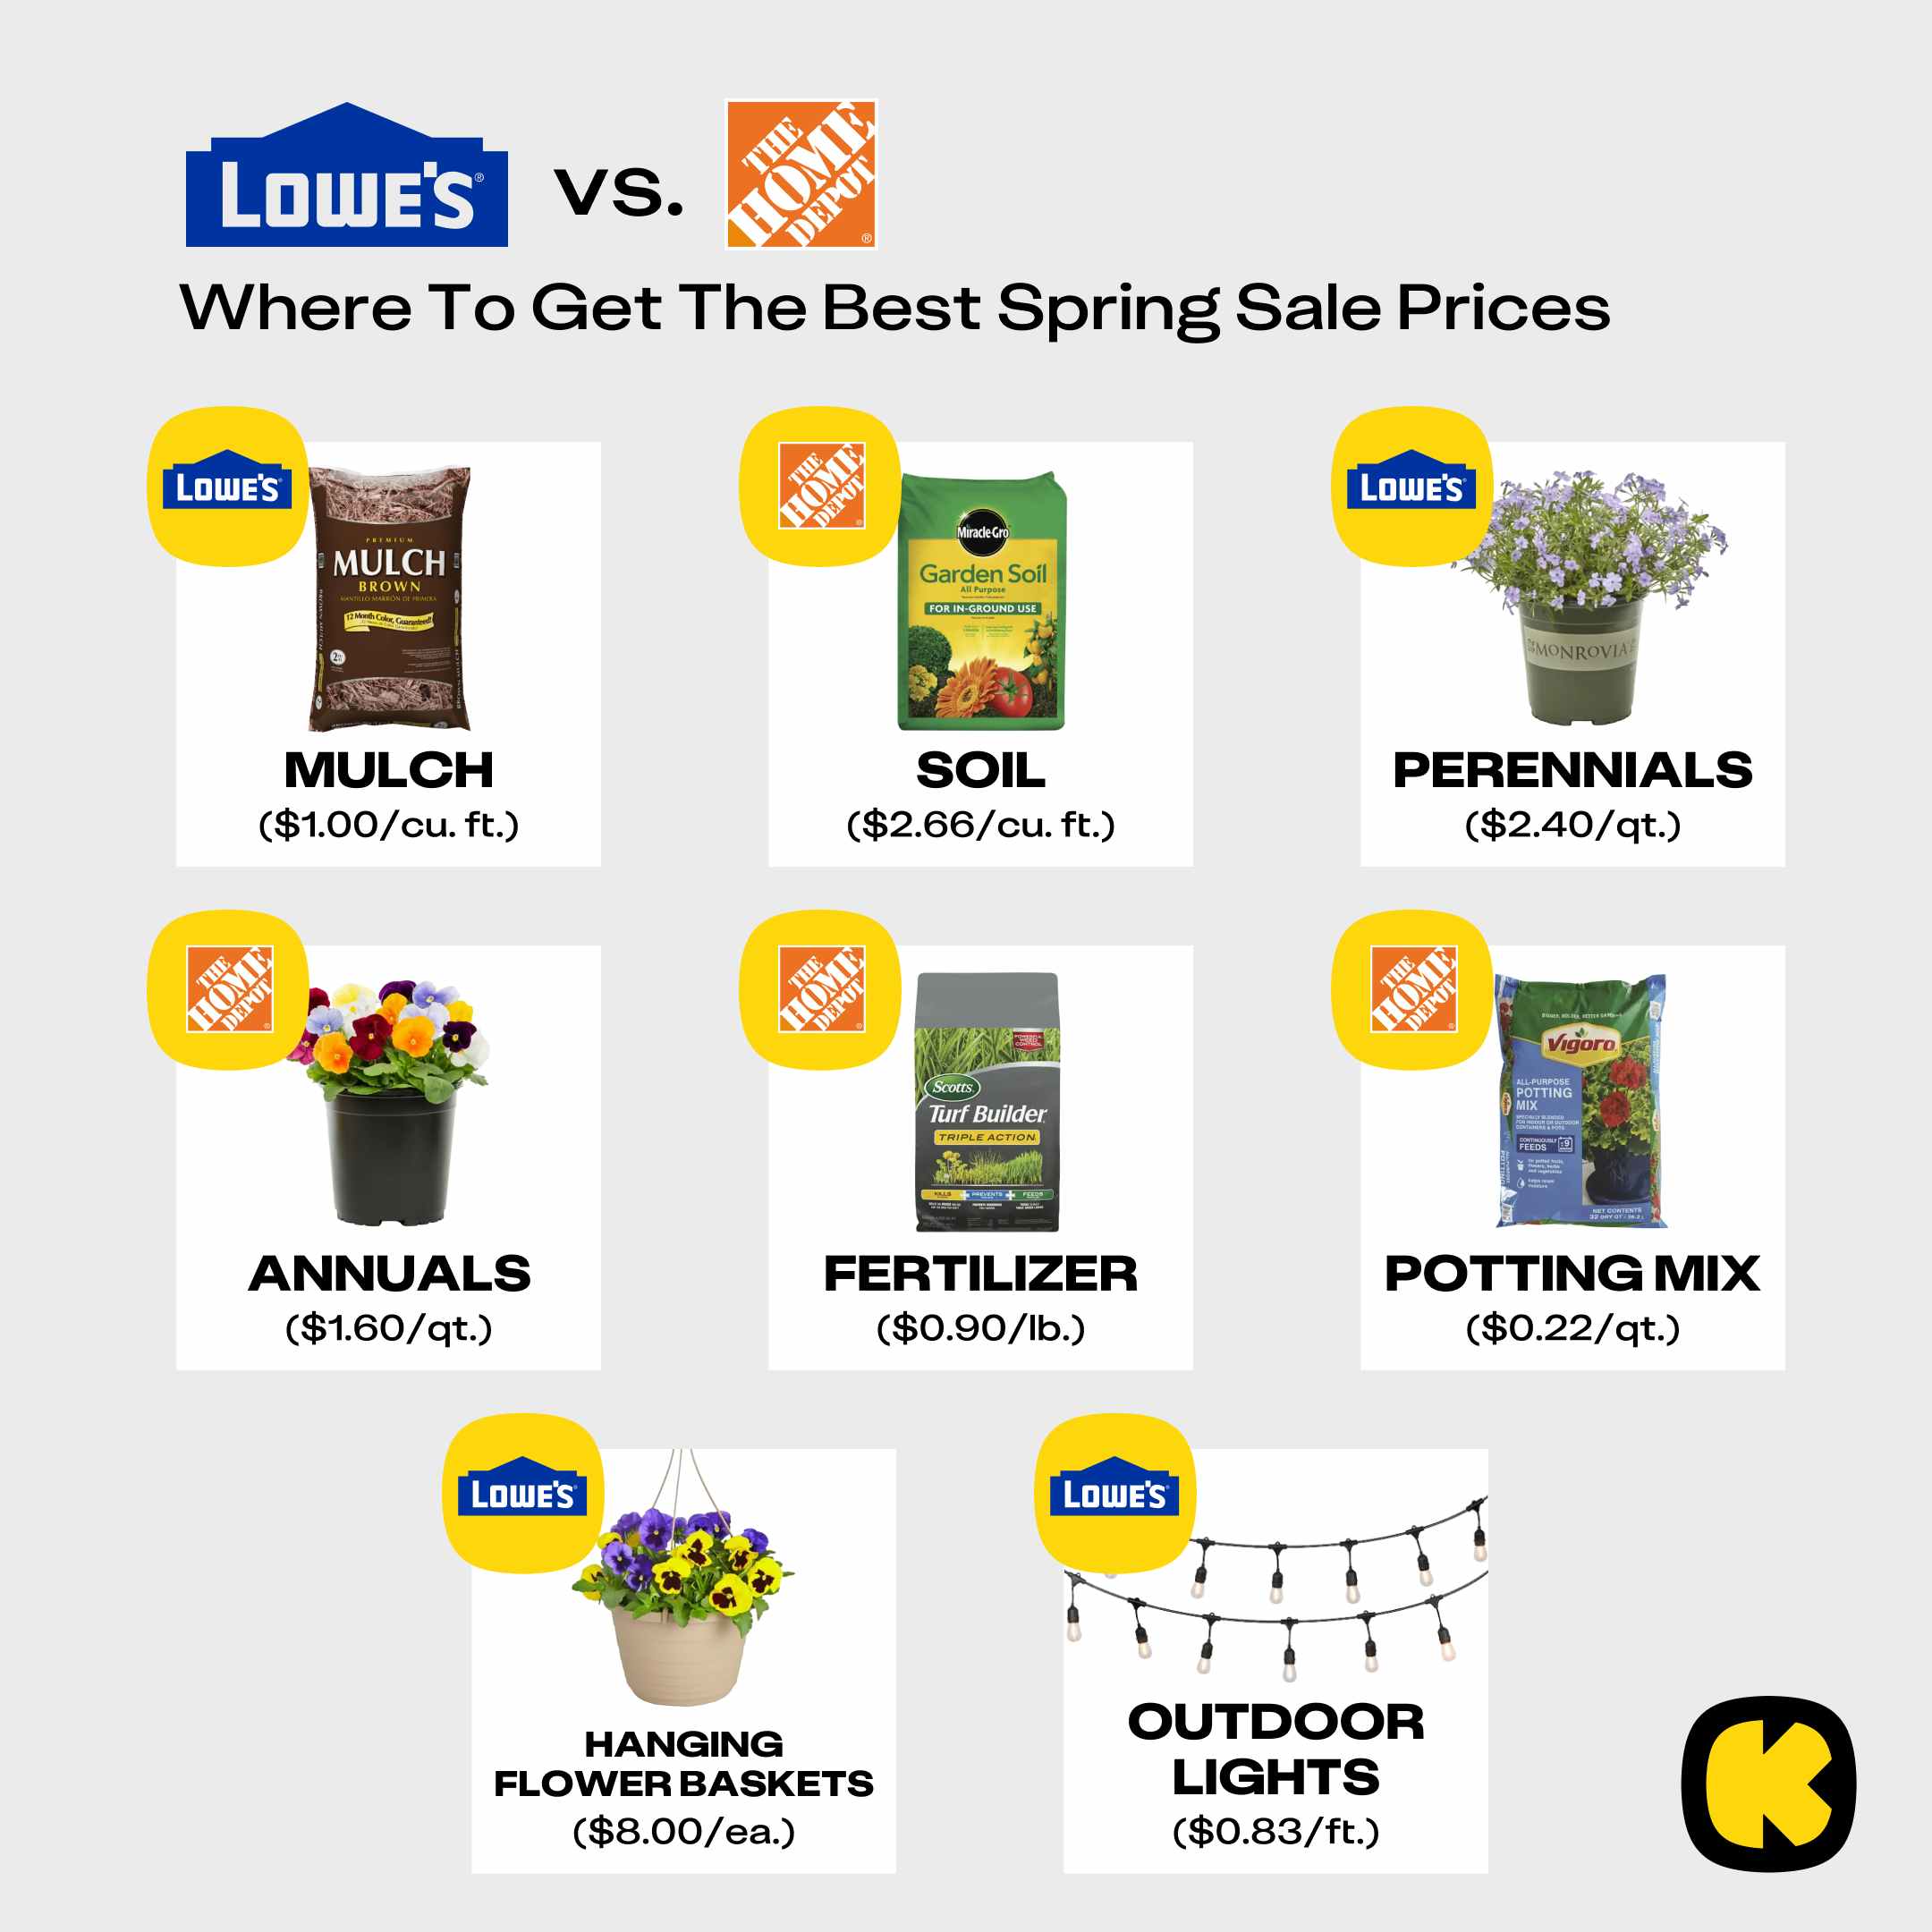 A comparison of Lowe's SpringFest sale and Home Depot's Spring Black Friday sale prices on certain lawn and garden items